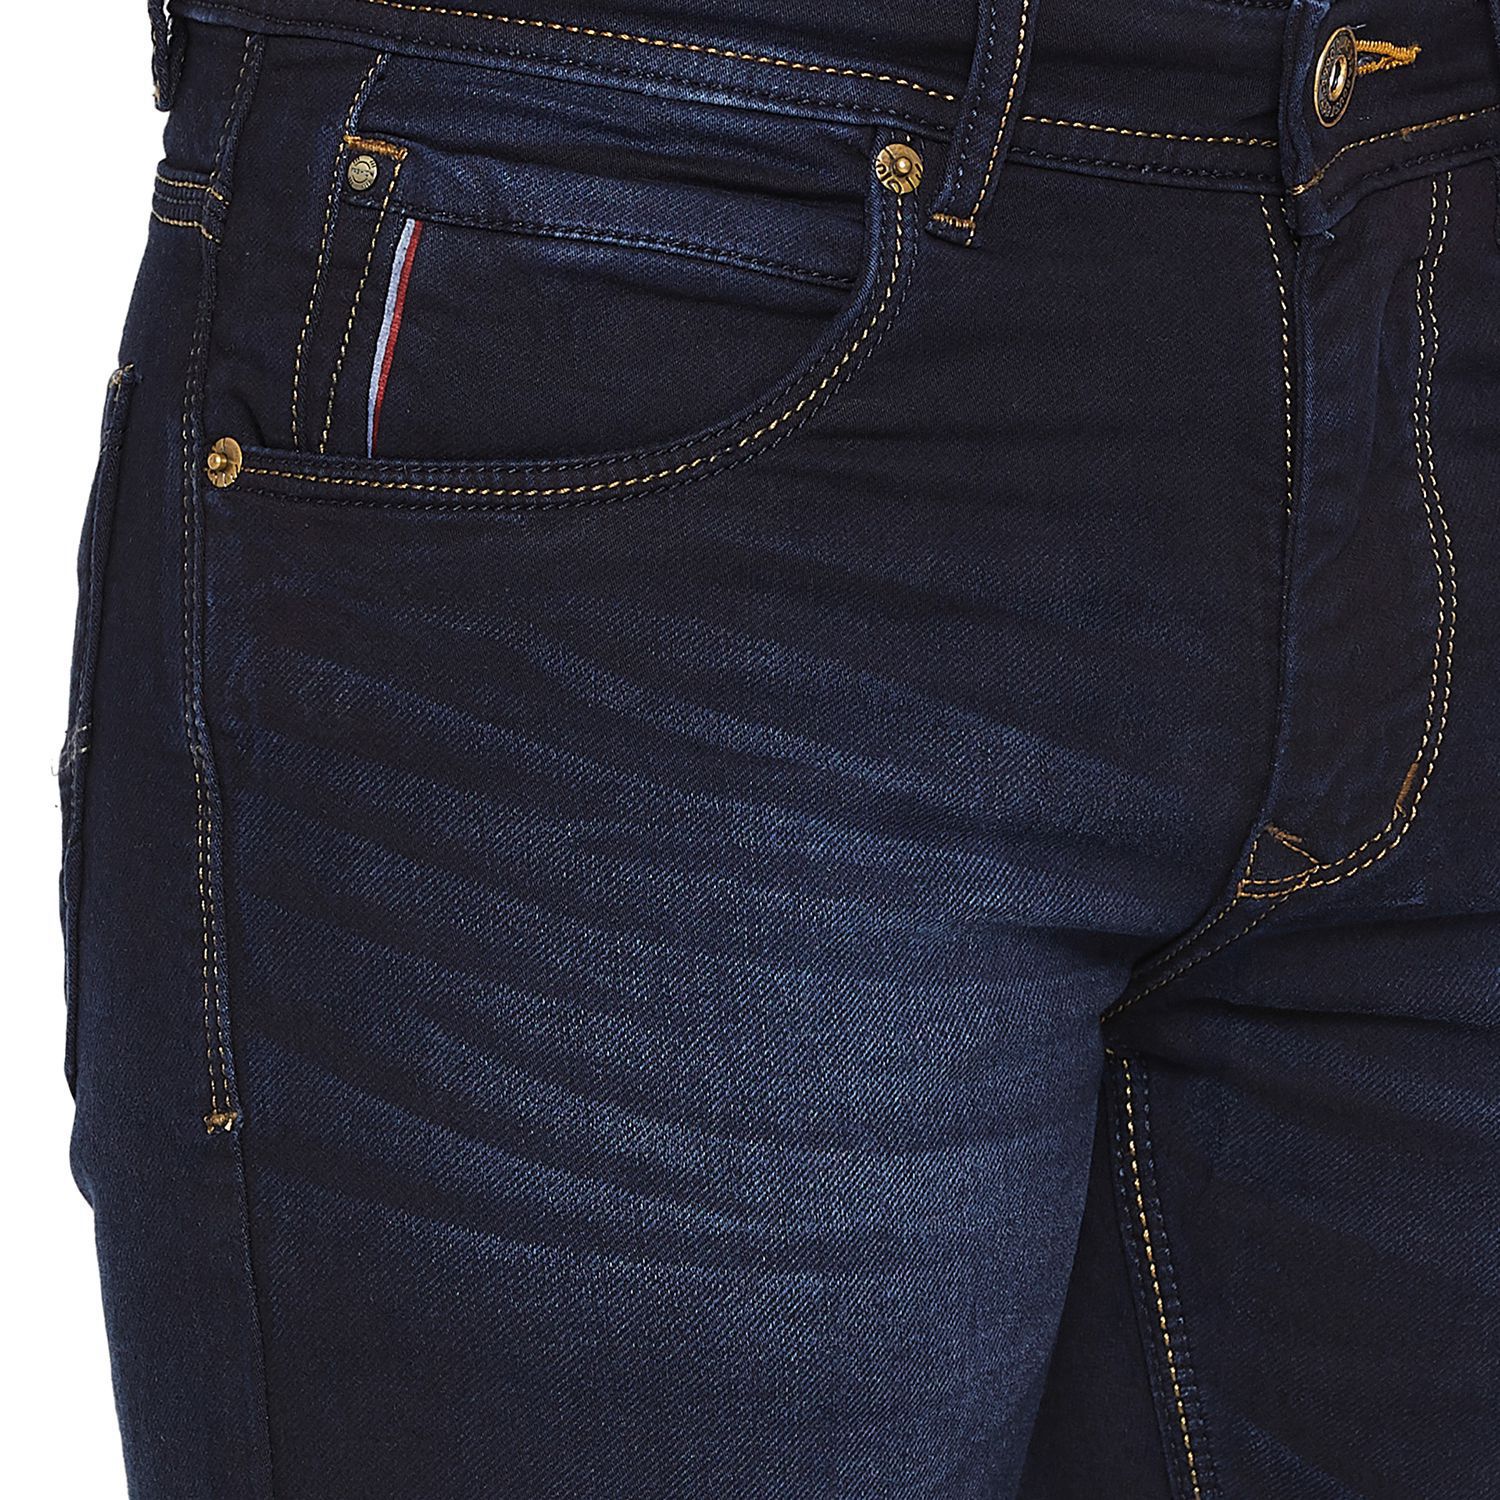 Duke Blue Slim Jeans - Buy Duke Blue Slim Jeans Online at Best Prices ...